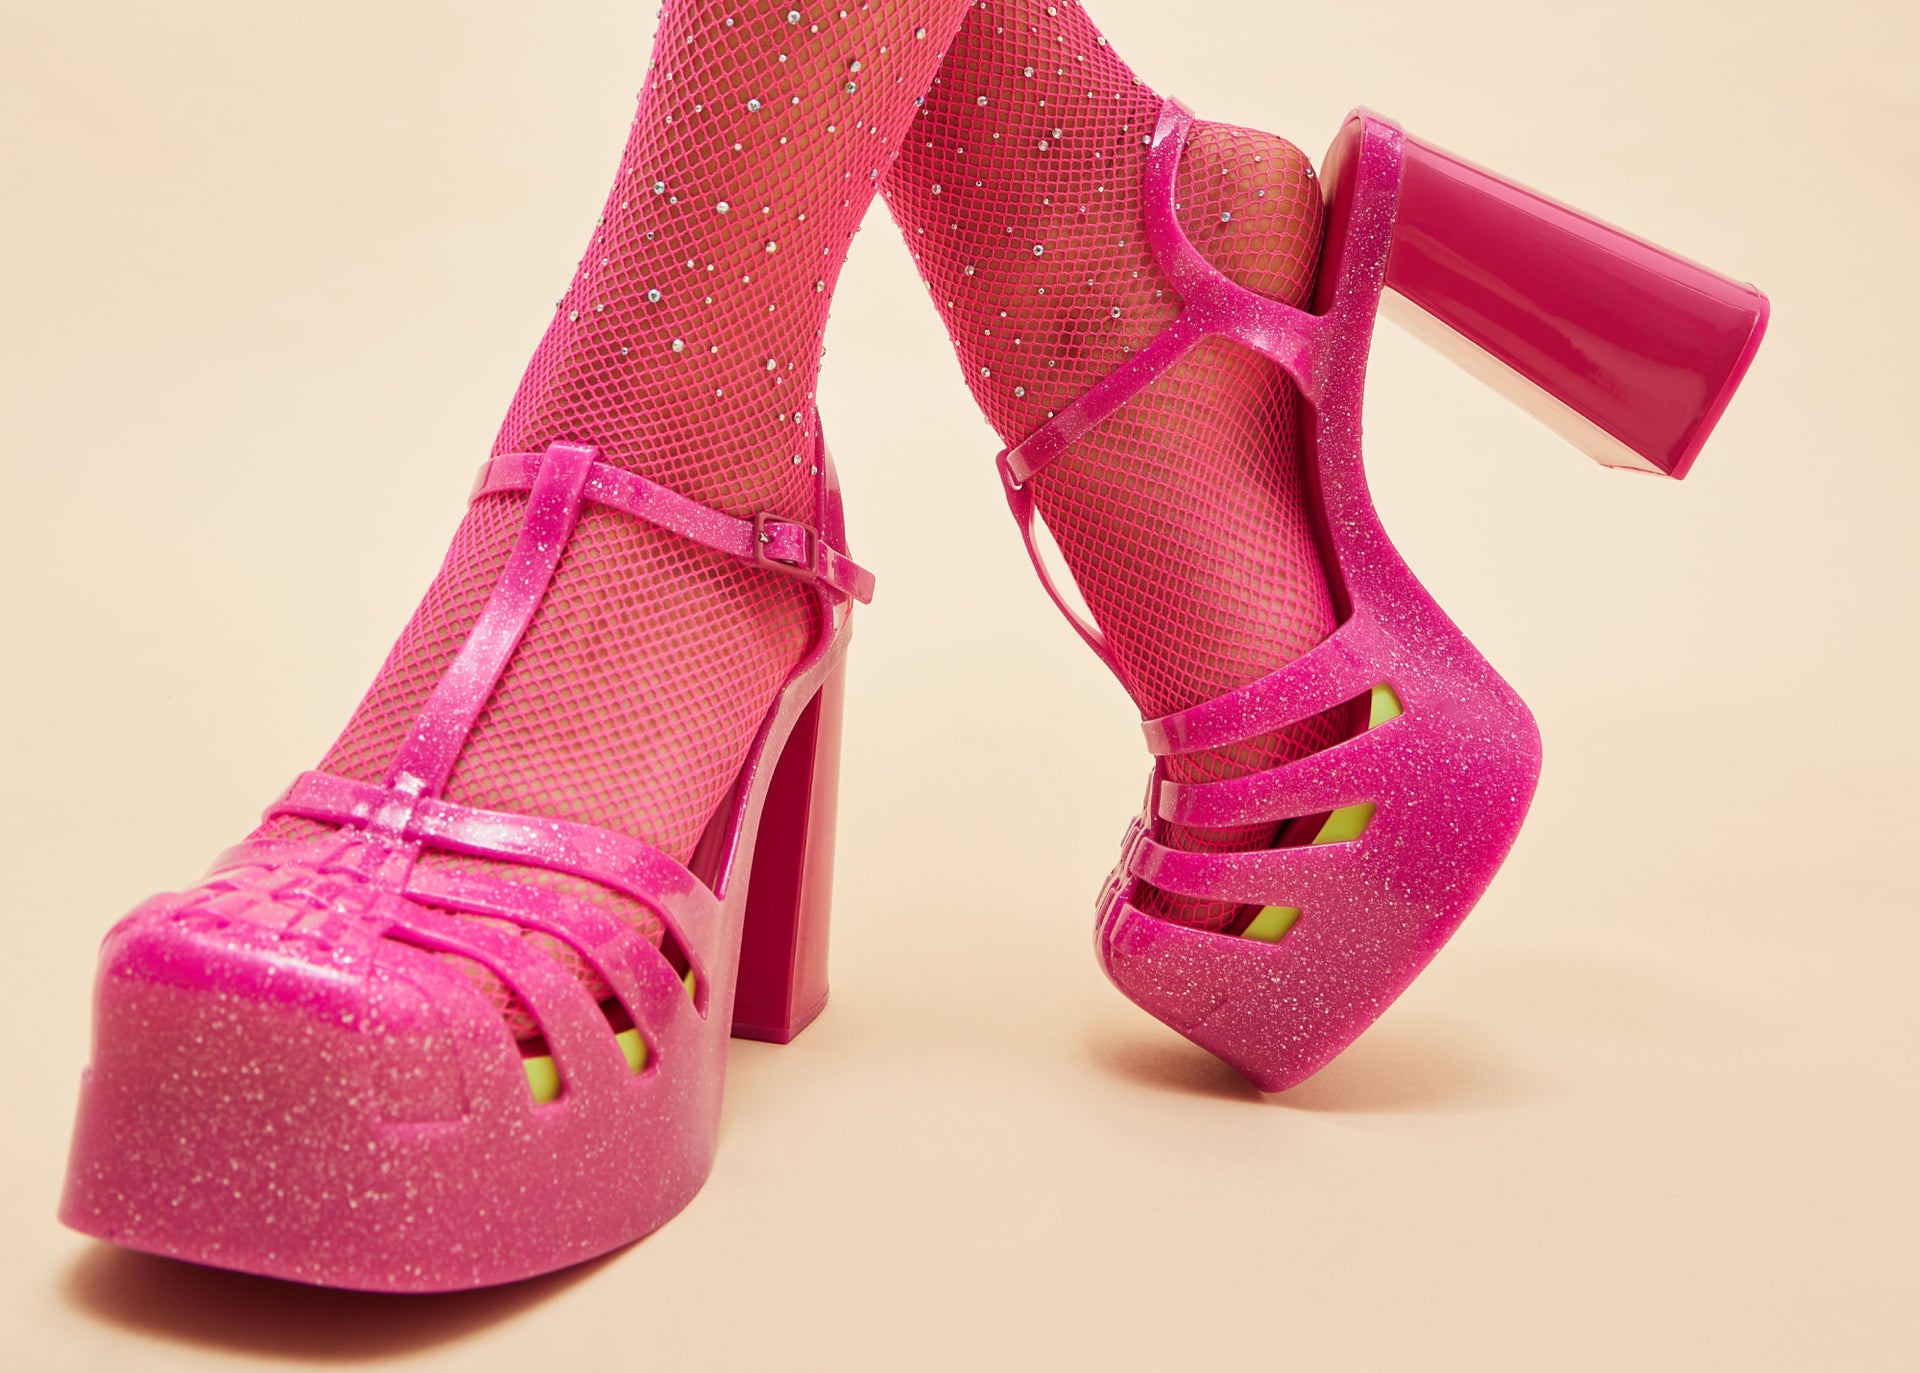 Free Photos - These Pink High Heel Shoes Are The Latest Trend In Women's  Fashion, Featuring A Bold Color And A Comfortable Design That Is Perfect  For Nights Out Or Special Occasions. |